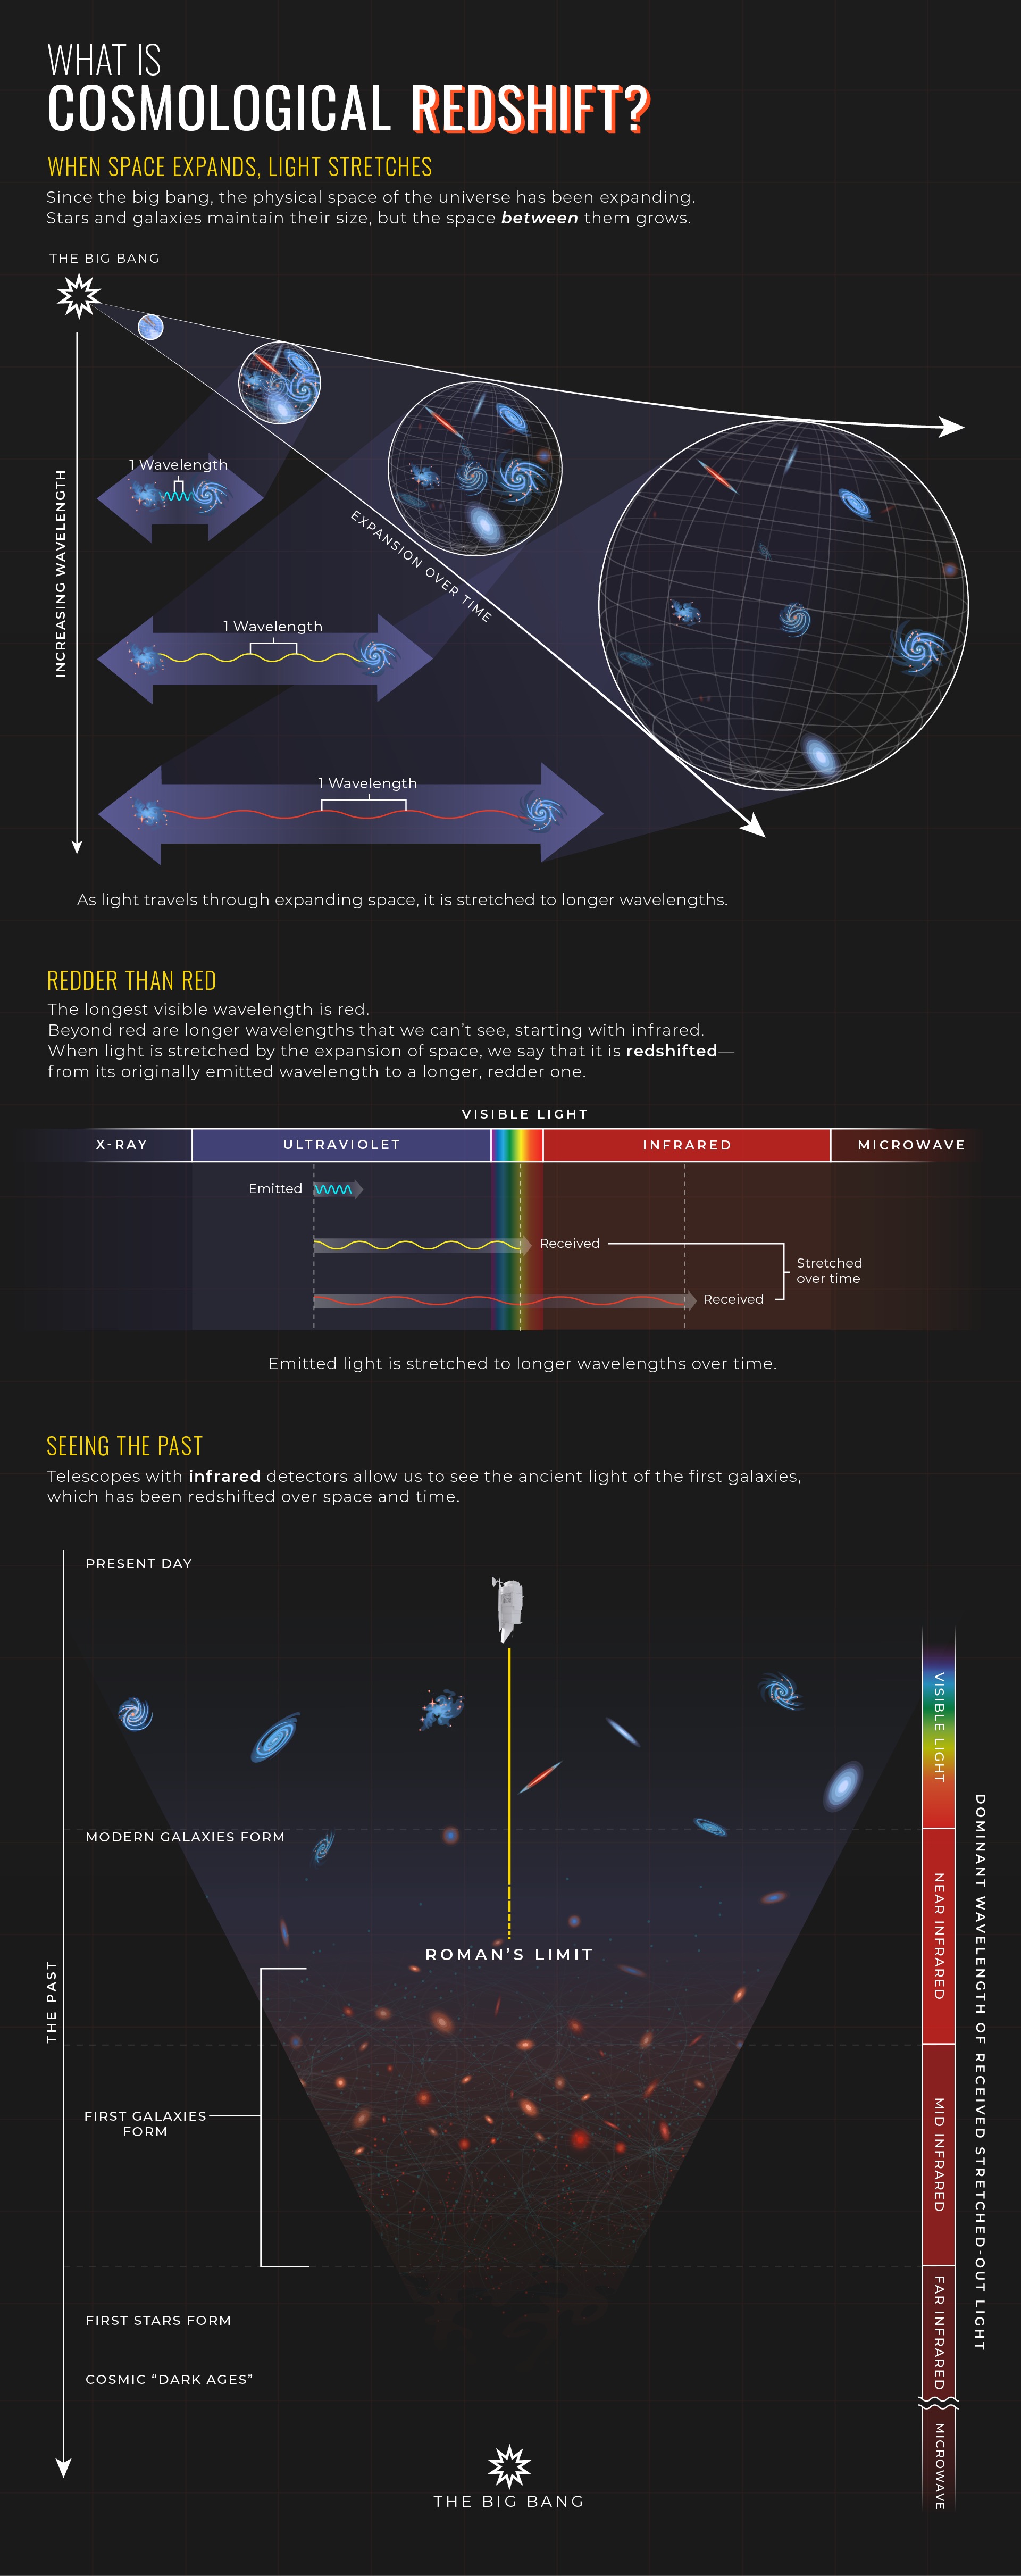 This infographic is divided into three sectionss. The first describes how wavelengths increase over time, shifting from blue to yellow to red as objects in space get older and farther away. The second shows how light stretched by the expansion of space becomes redder and enters the infrared portion of the electromagnetic spectrum. The third shows how telescopes like Roman use infrared detectors to see this ancient light and learn about the early universe.